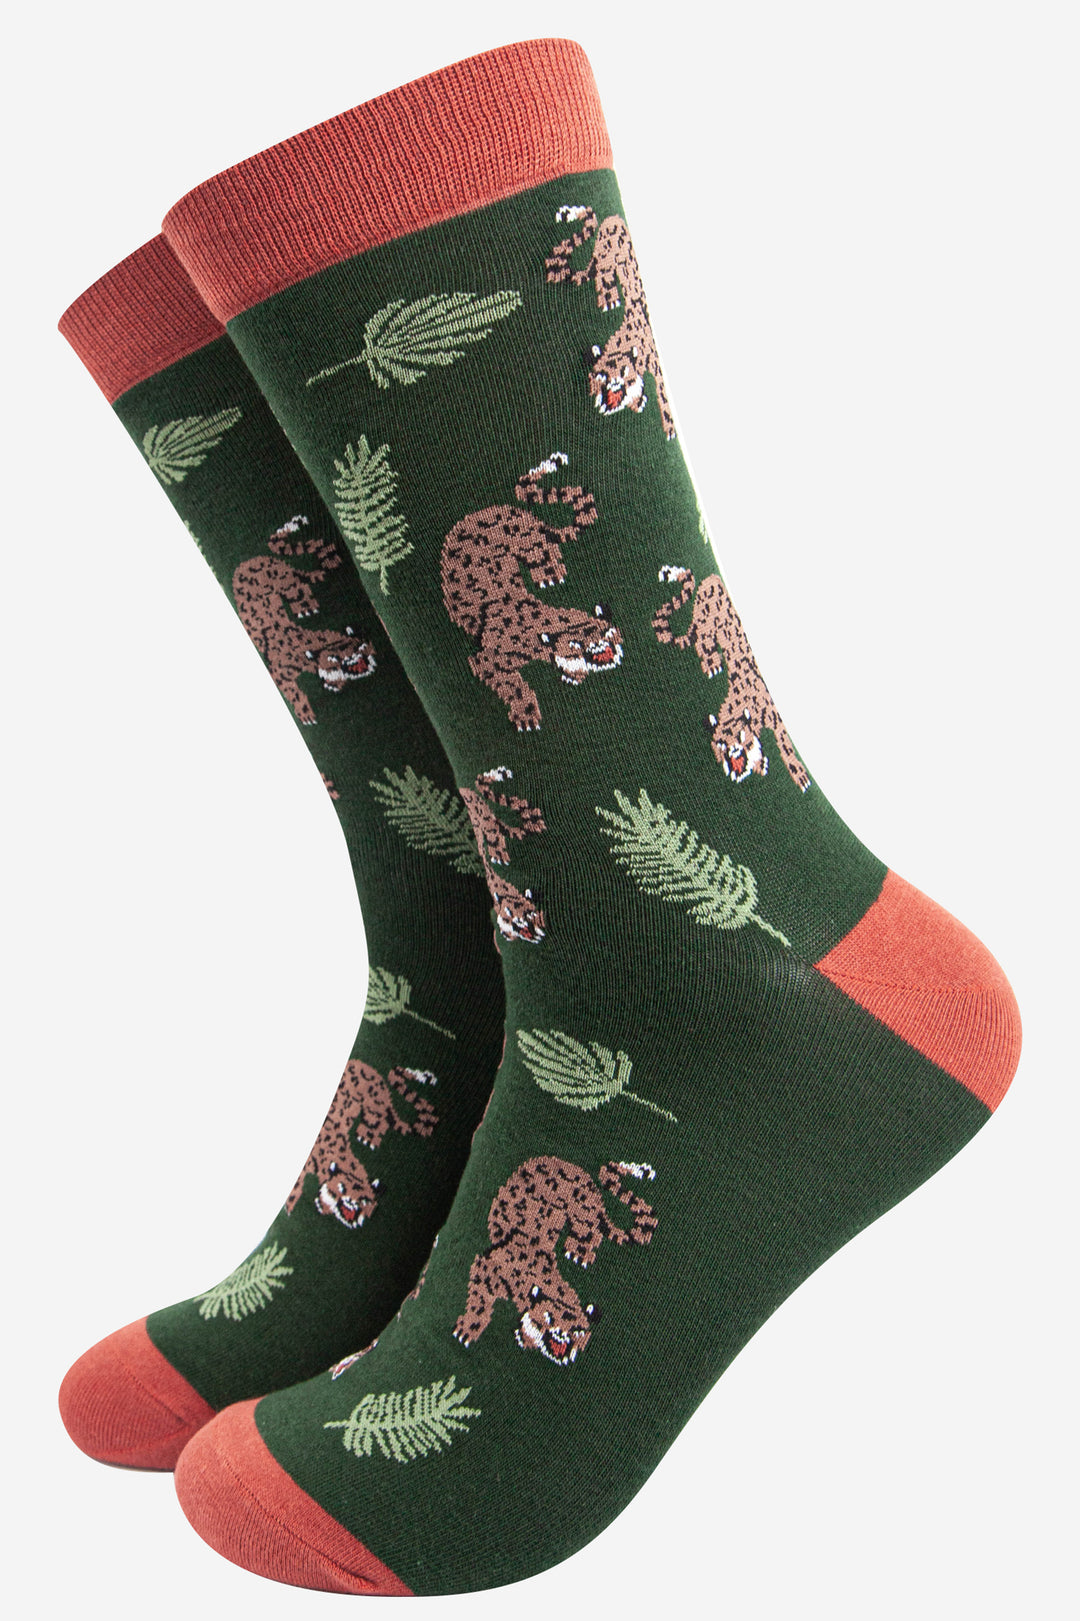 green and orange bamboo socks with an all over pattern featuring a prowling cheetah and jungle leaves